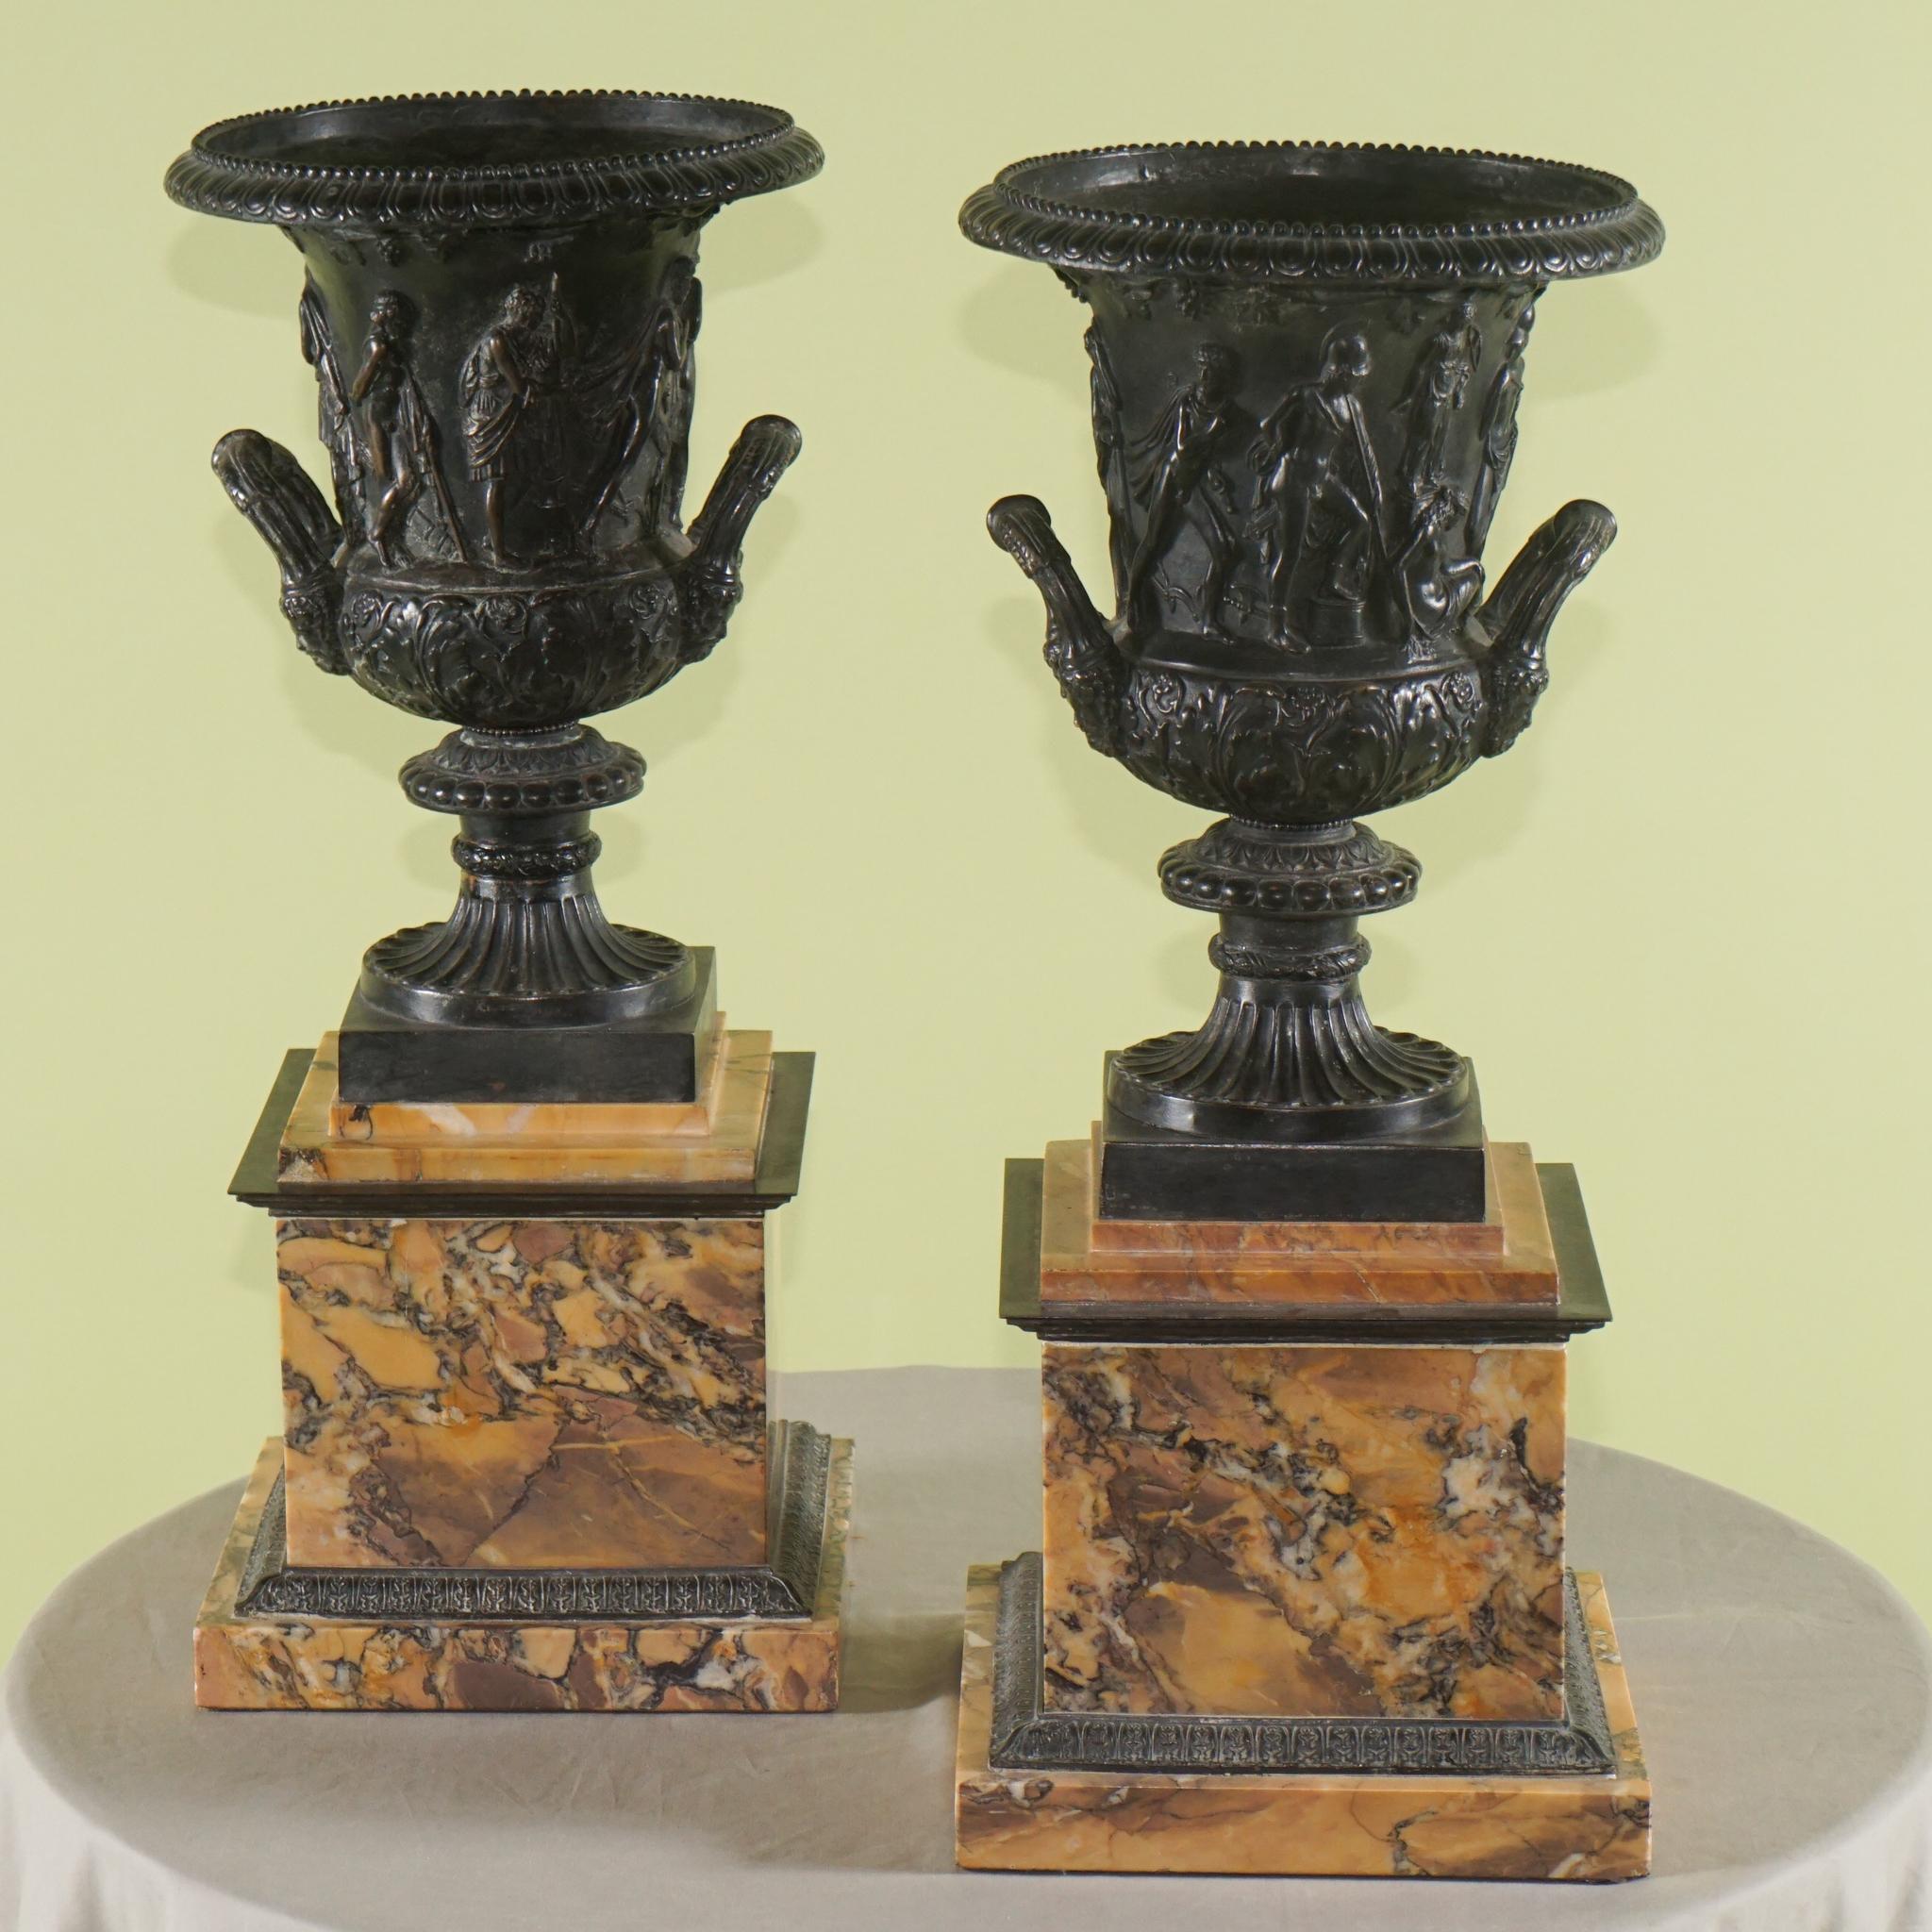 This impressive and large pair of decorative urns from the grand tour are designed to recreate the famous Medici Vase. The grand vase a 1st century AD Greek massive carved marble urn meant to grace a great roman villa as a garden ornament now